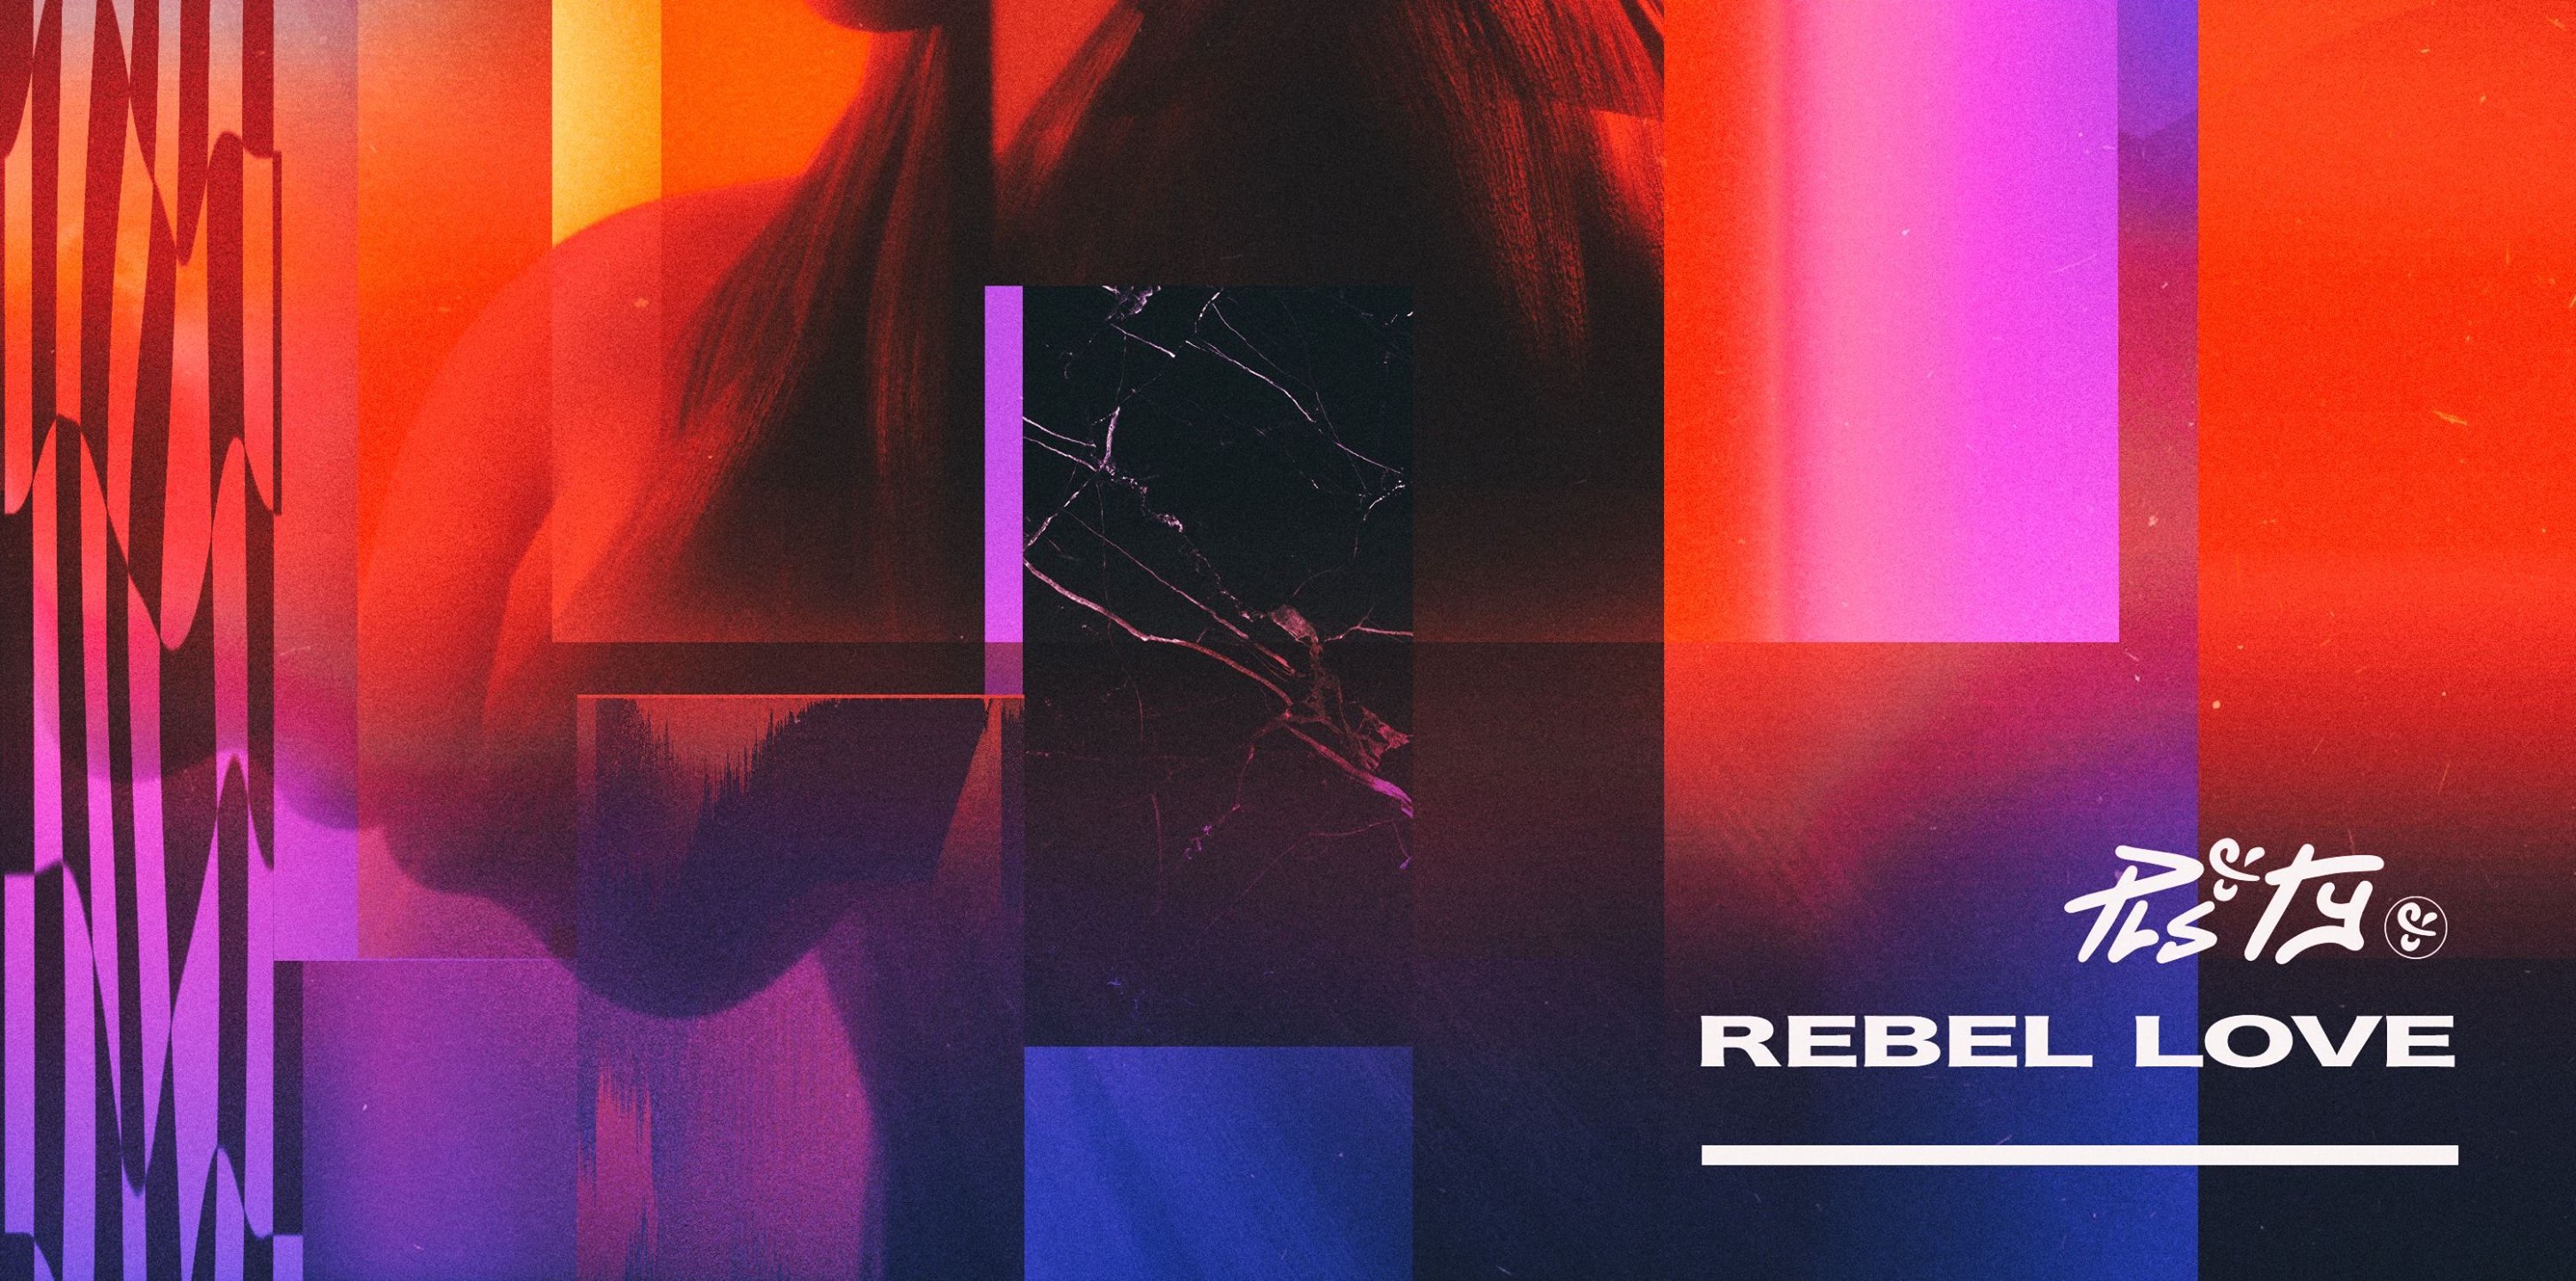 PLS&TY’s “Rebel Love” Pulls at Your Heartstrings